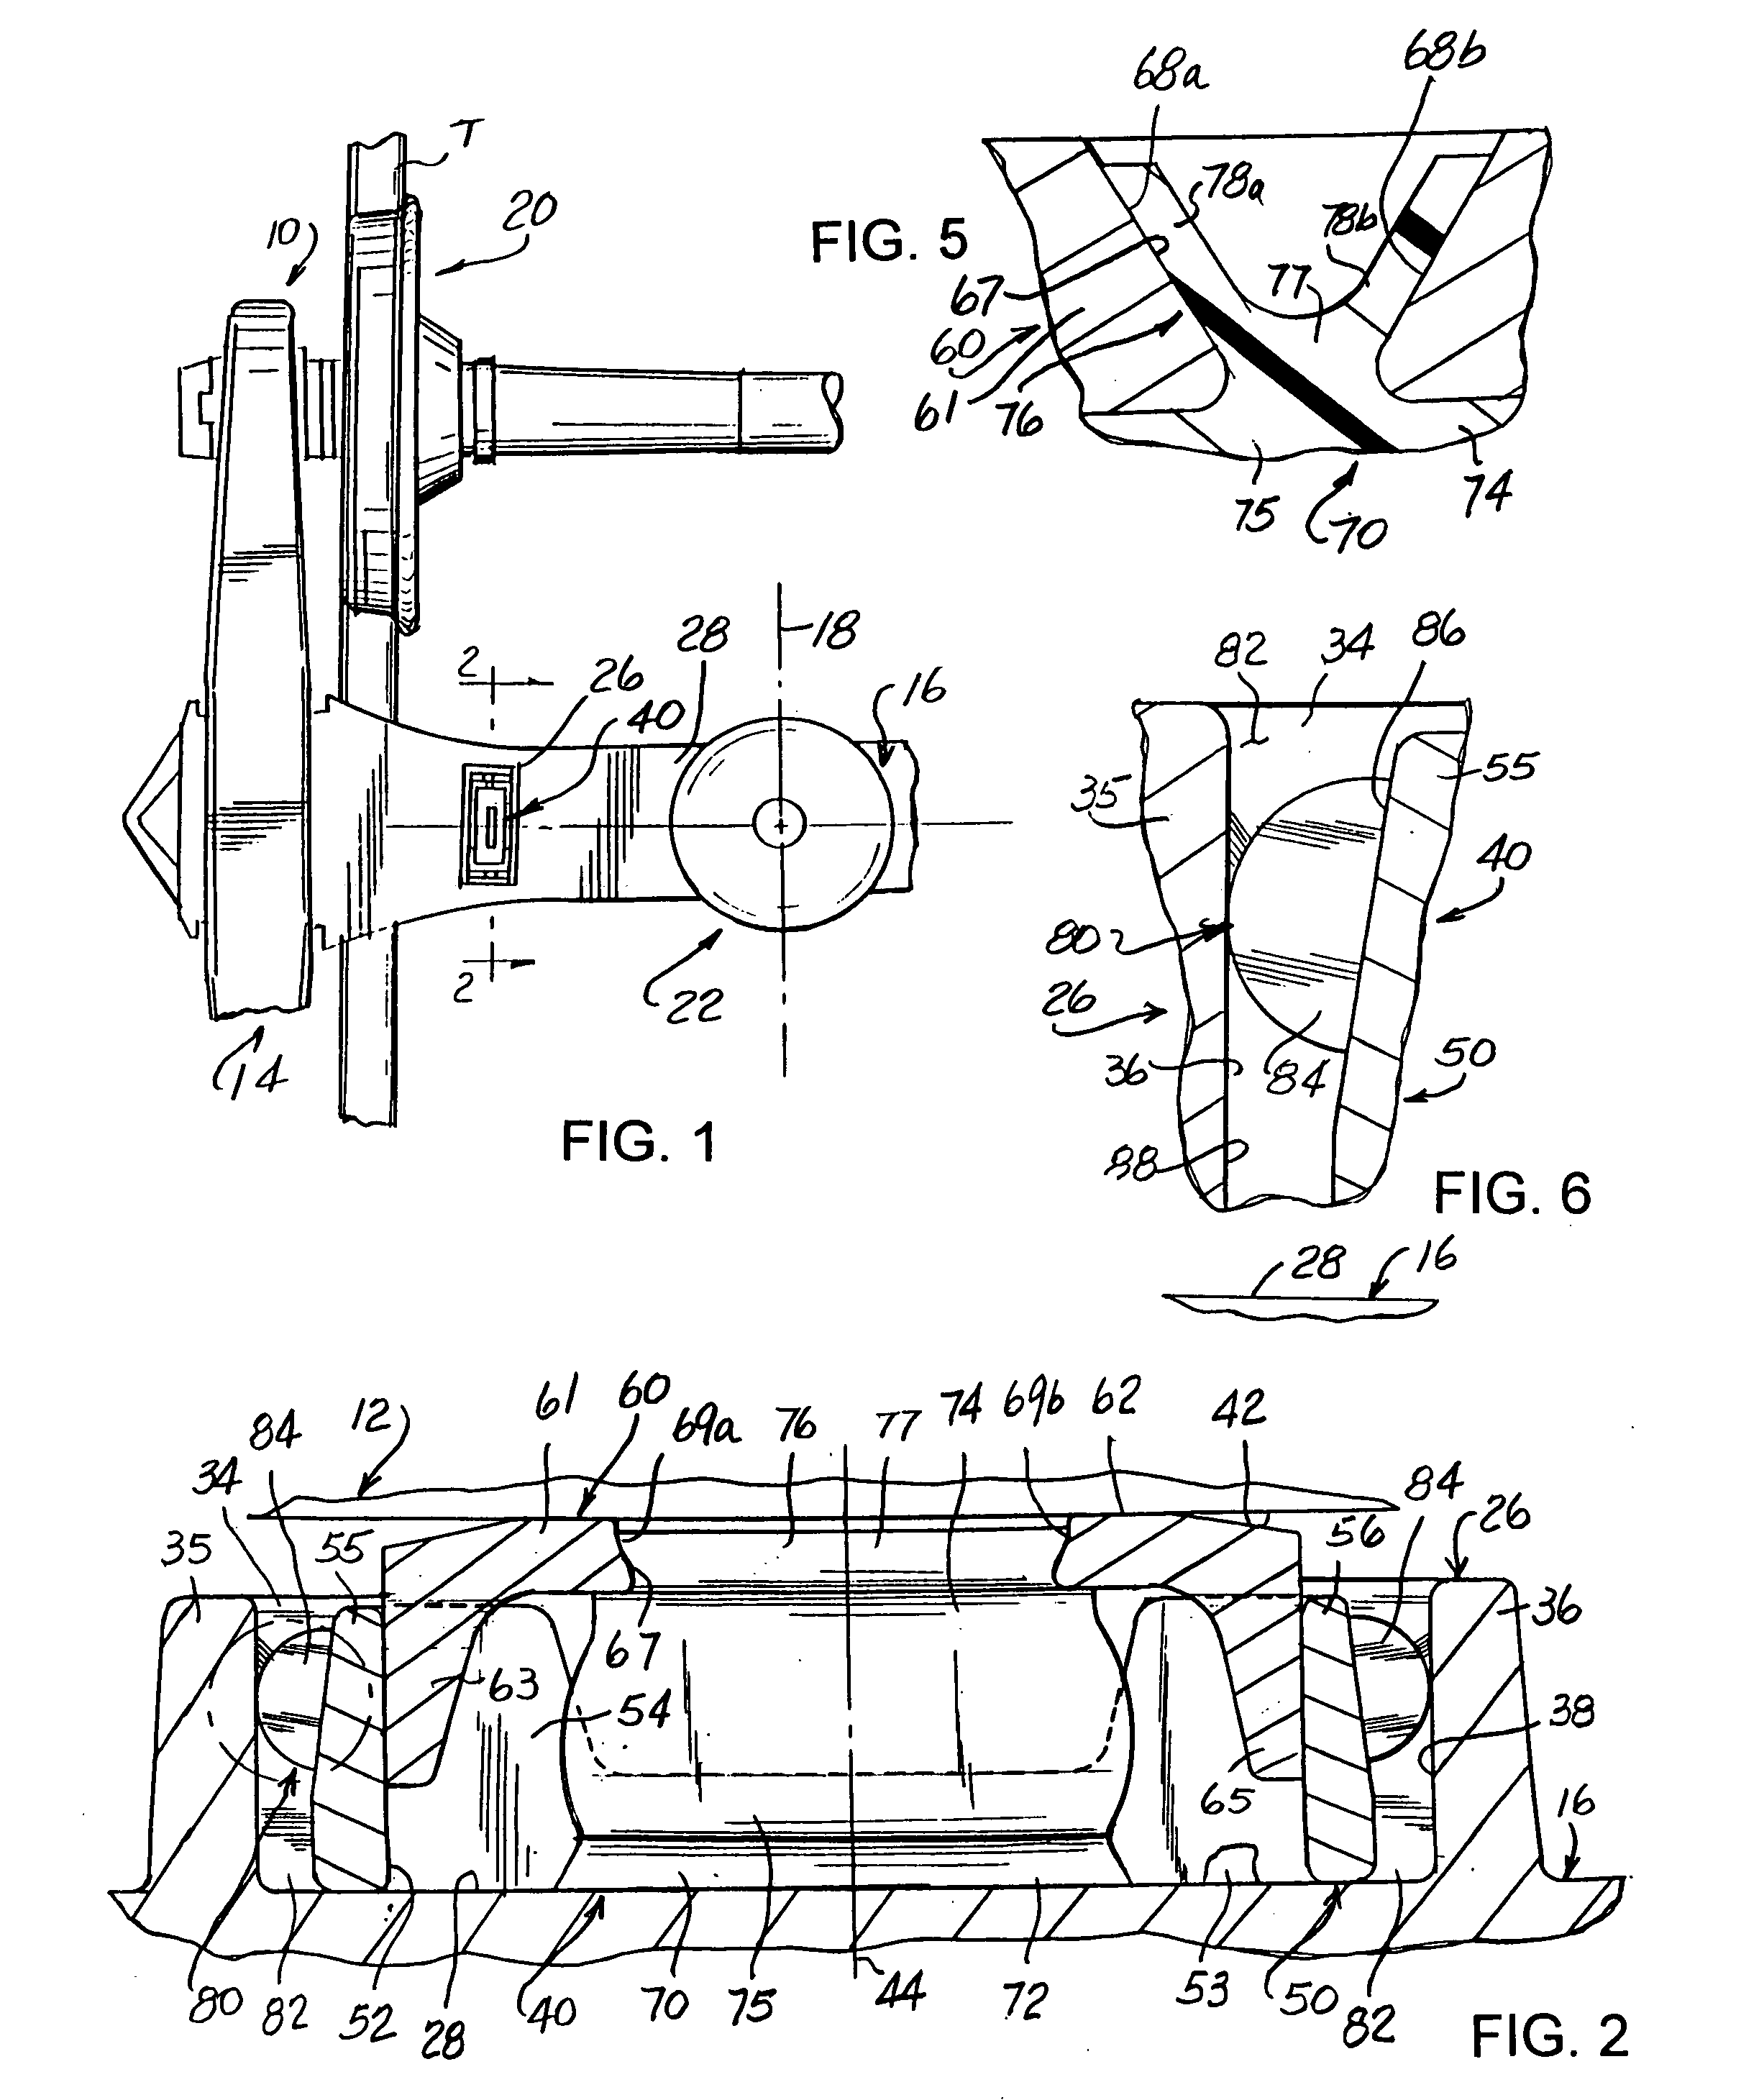 Constant contact side bearing assembly for a railcar